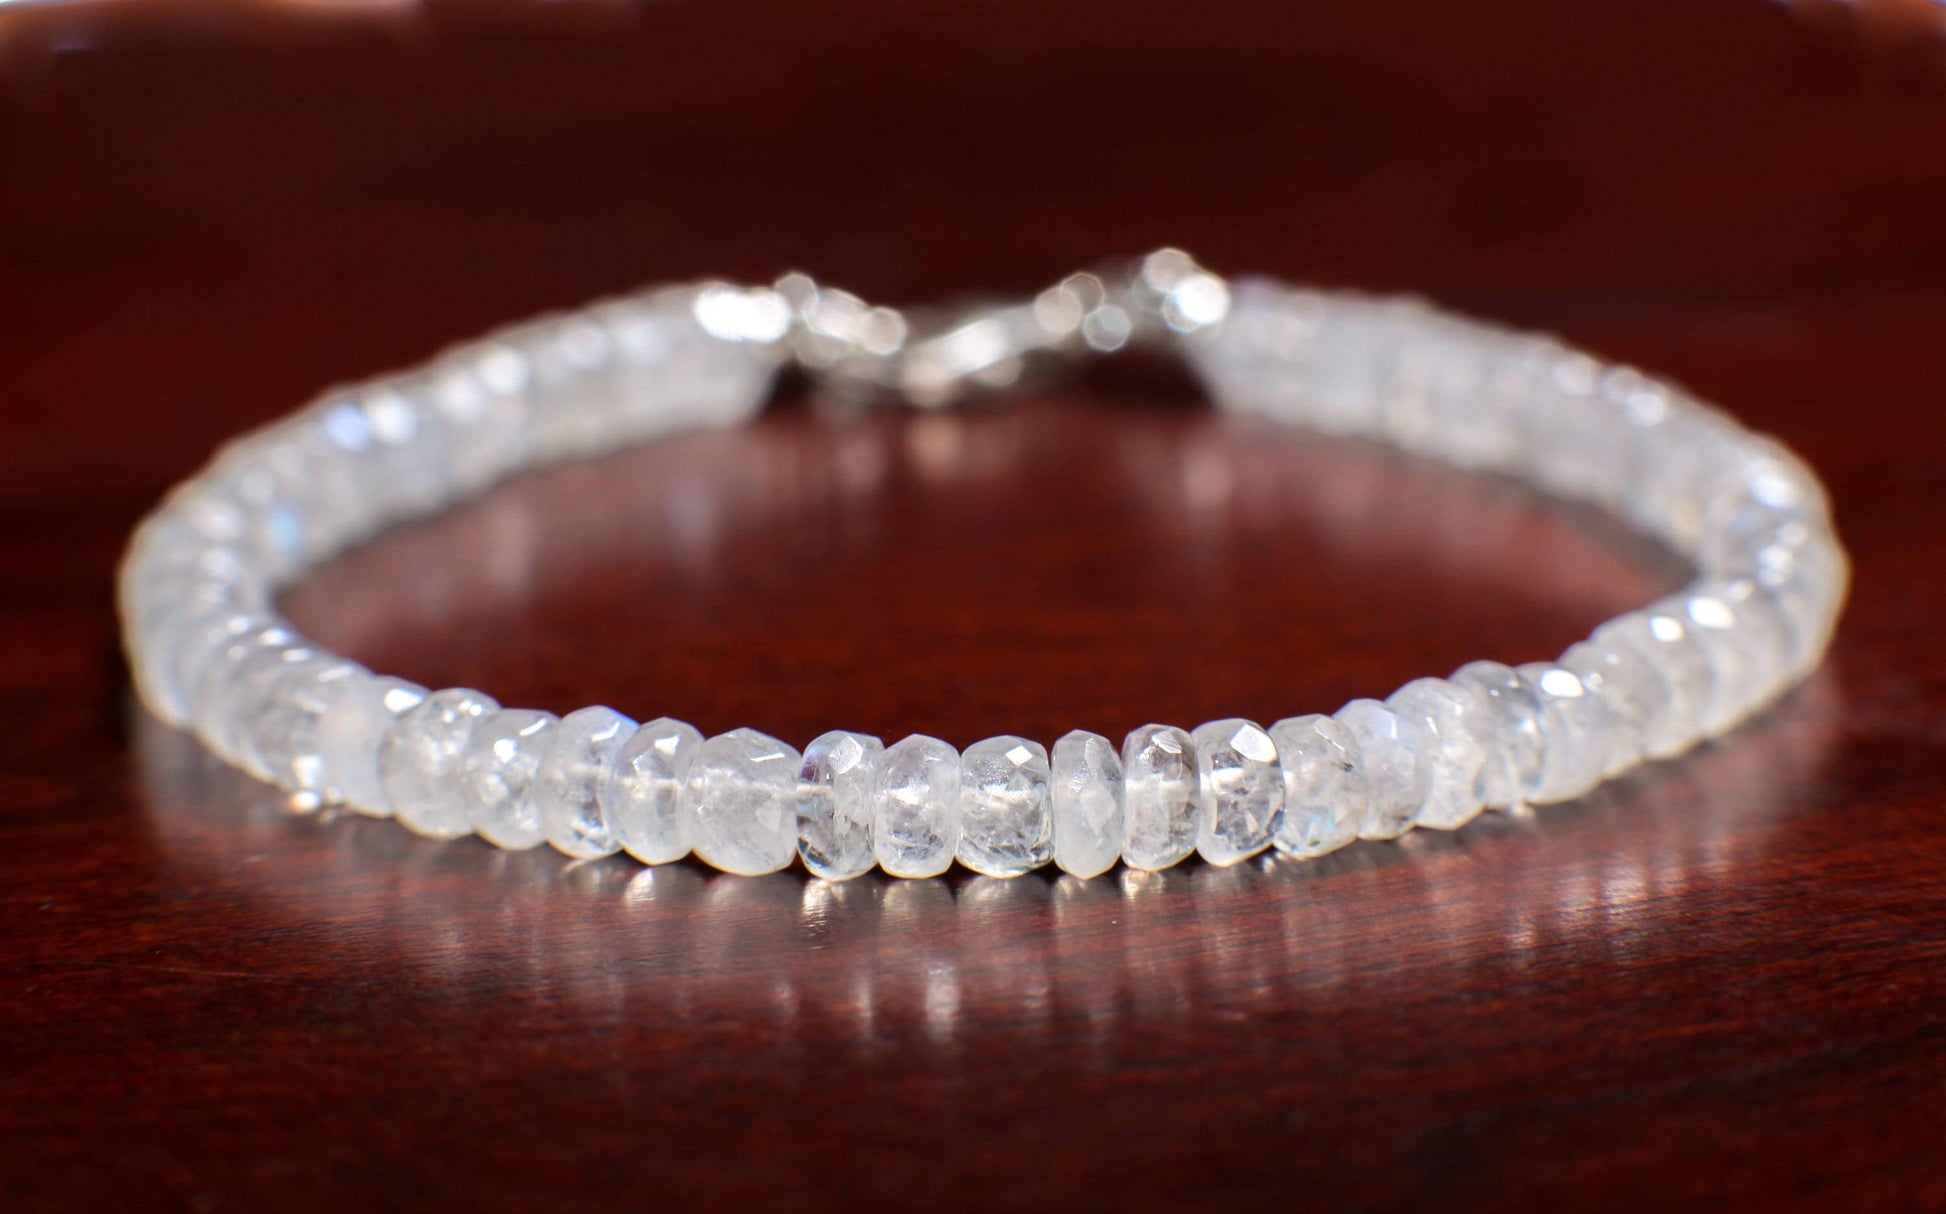 Moonstone Faceted Rondelle 4-5mm Bracelet in 925 Sterling Silver or 14K Gold Filled Clasp, Natural Precious gift for her.